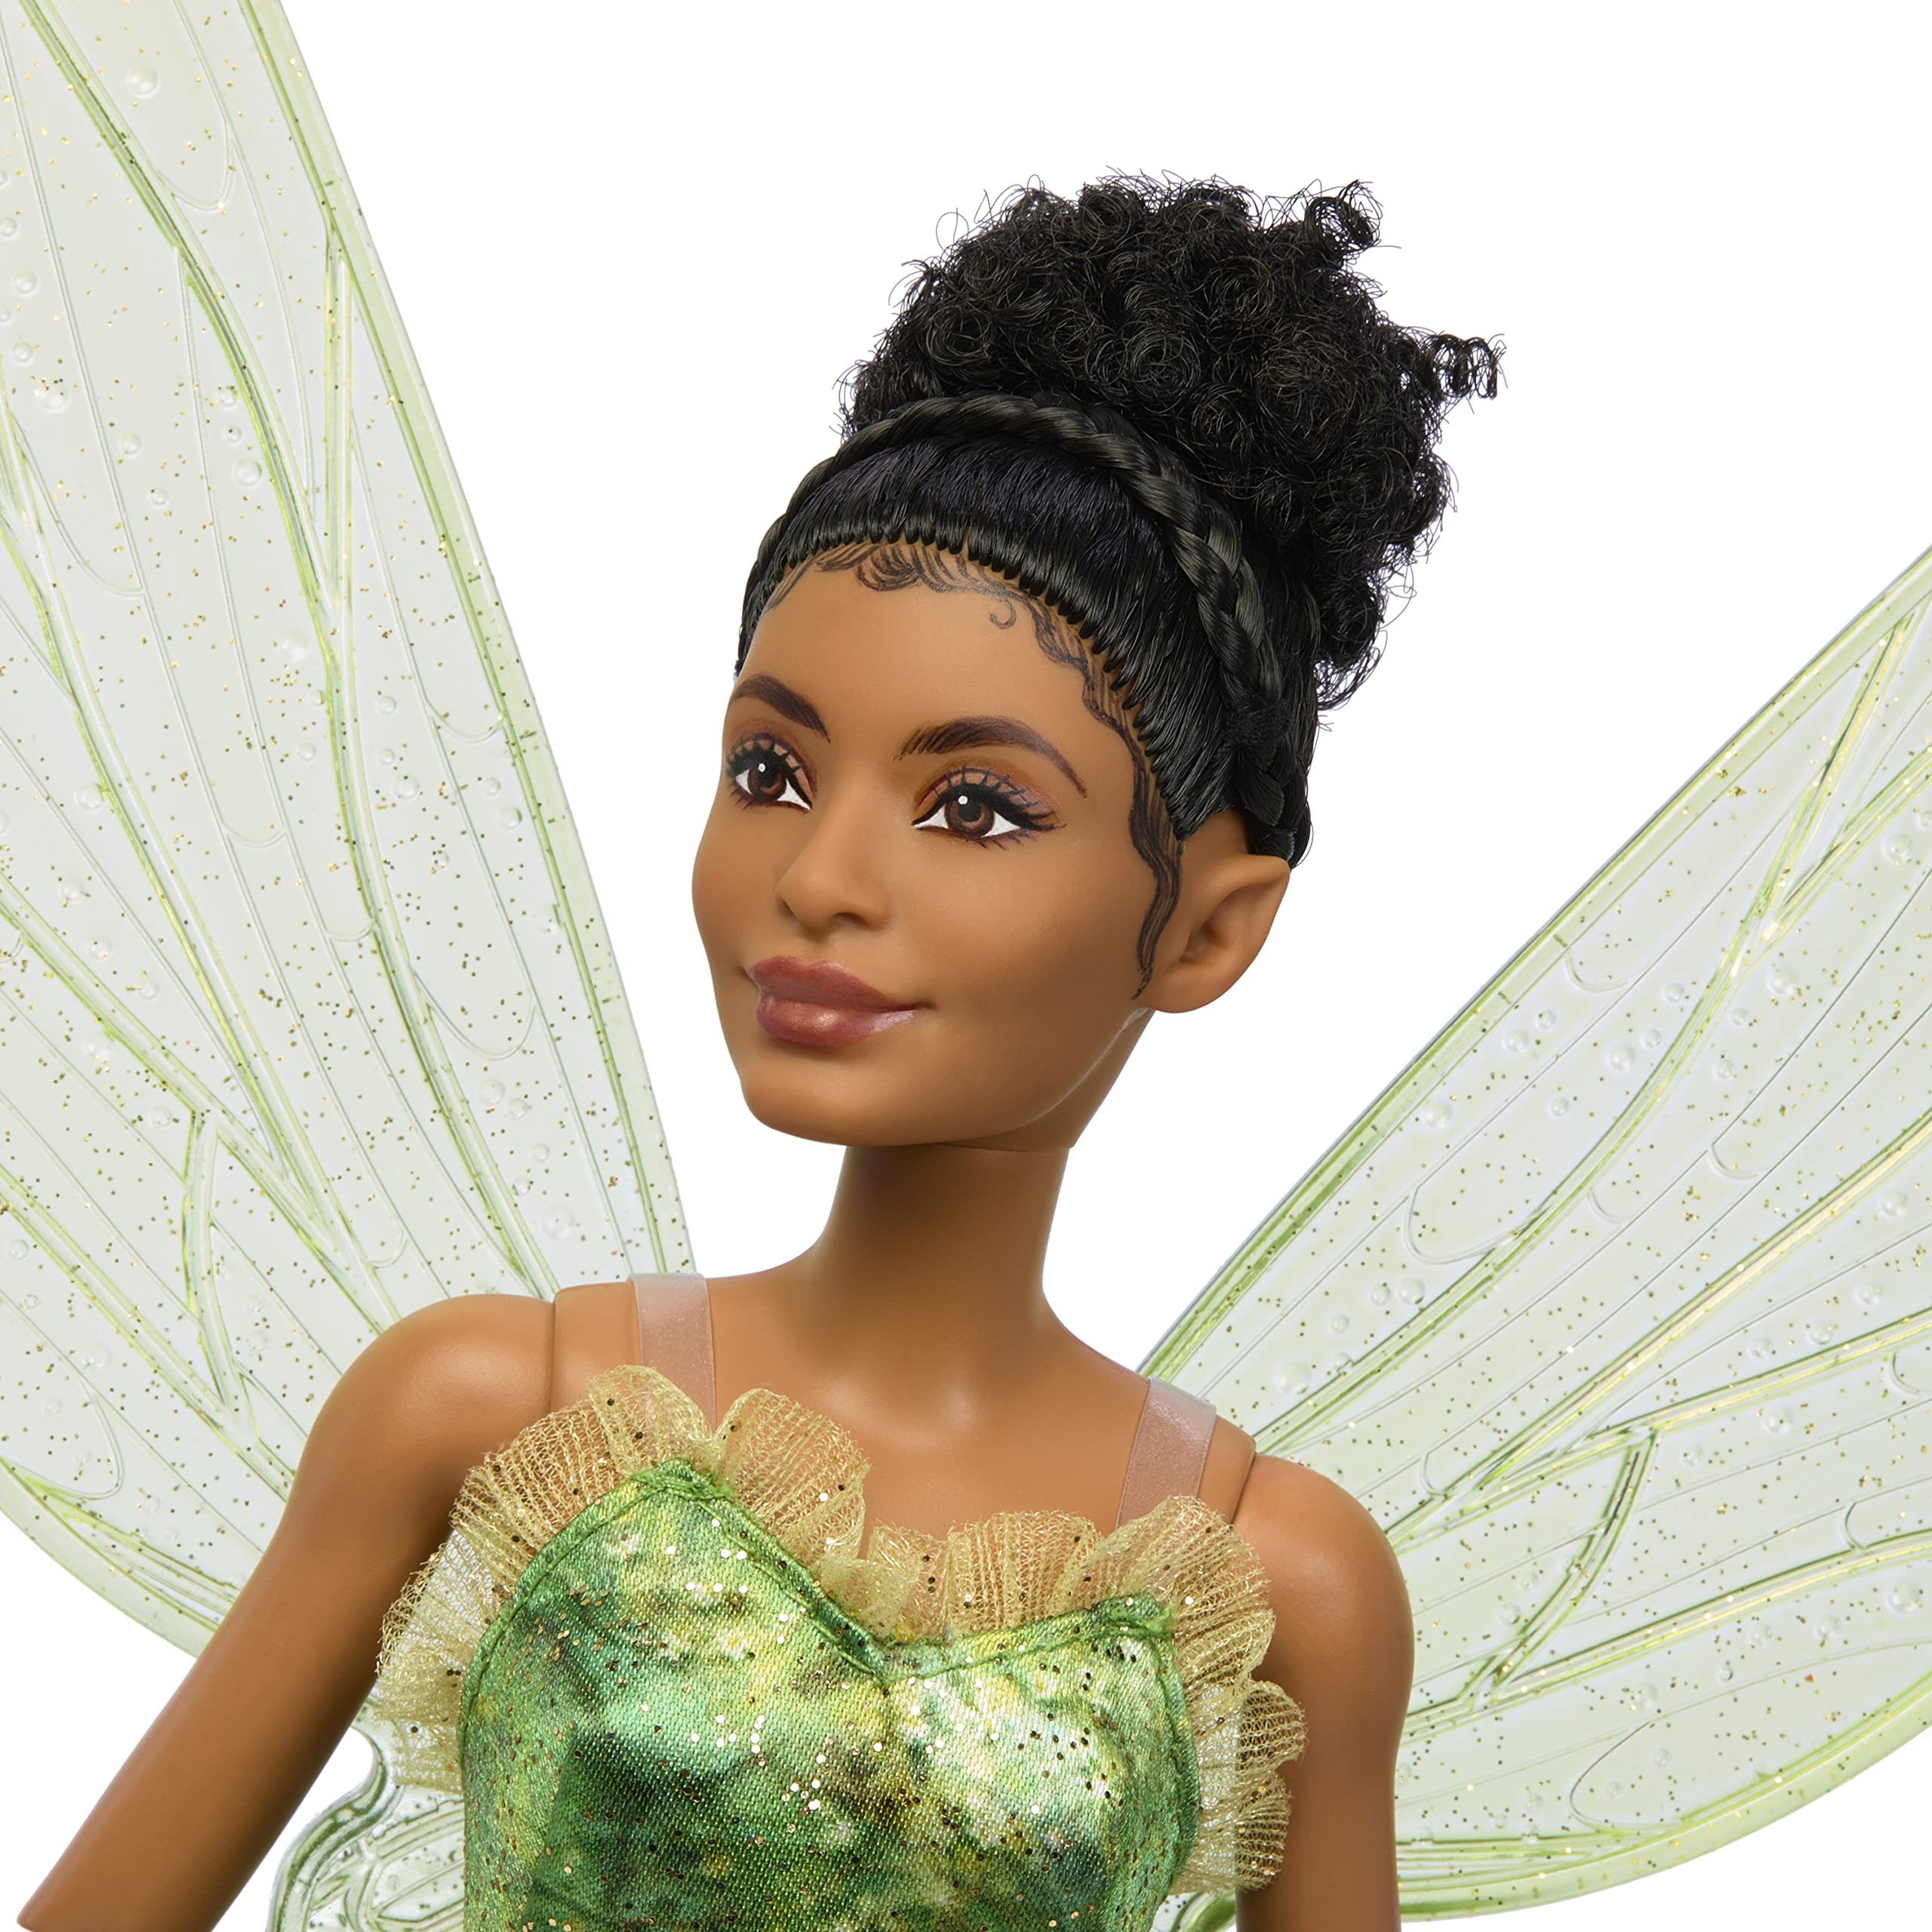 Disney Movie Peter Pan & Wendy Toys, Tinker Bell Fairy Doll with Wings, Collectible Inspired by Disney's Peter Pan & Wendy